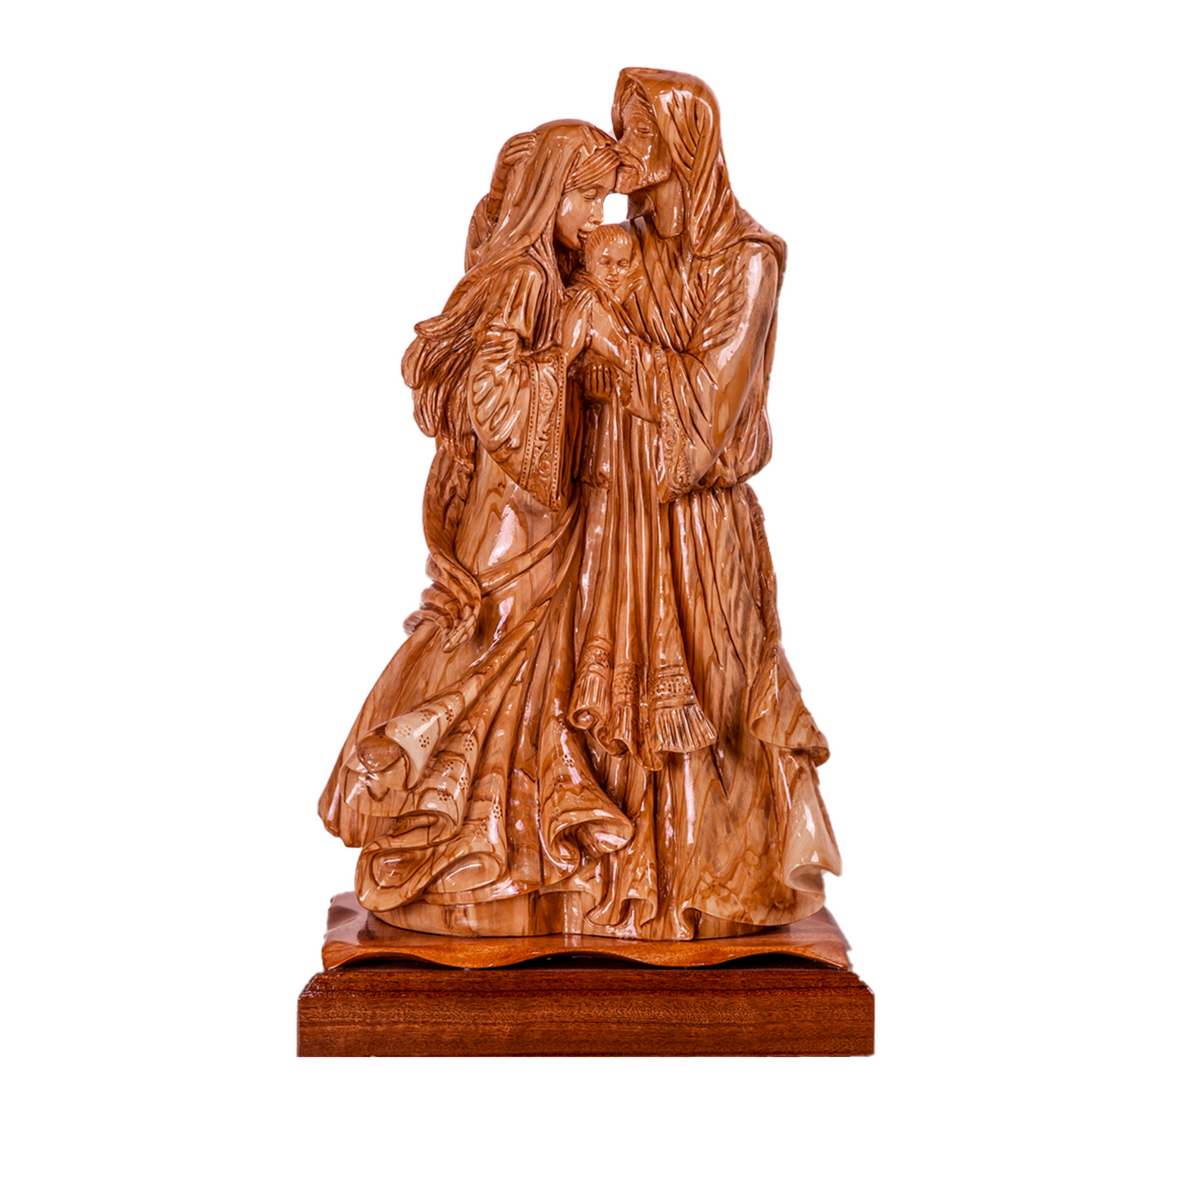 The Holy Family, Cathedral Quality, Size: 12" x 8.8" x 21.5"